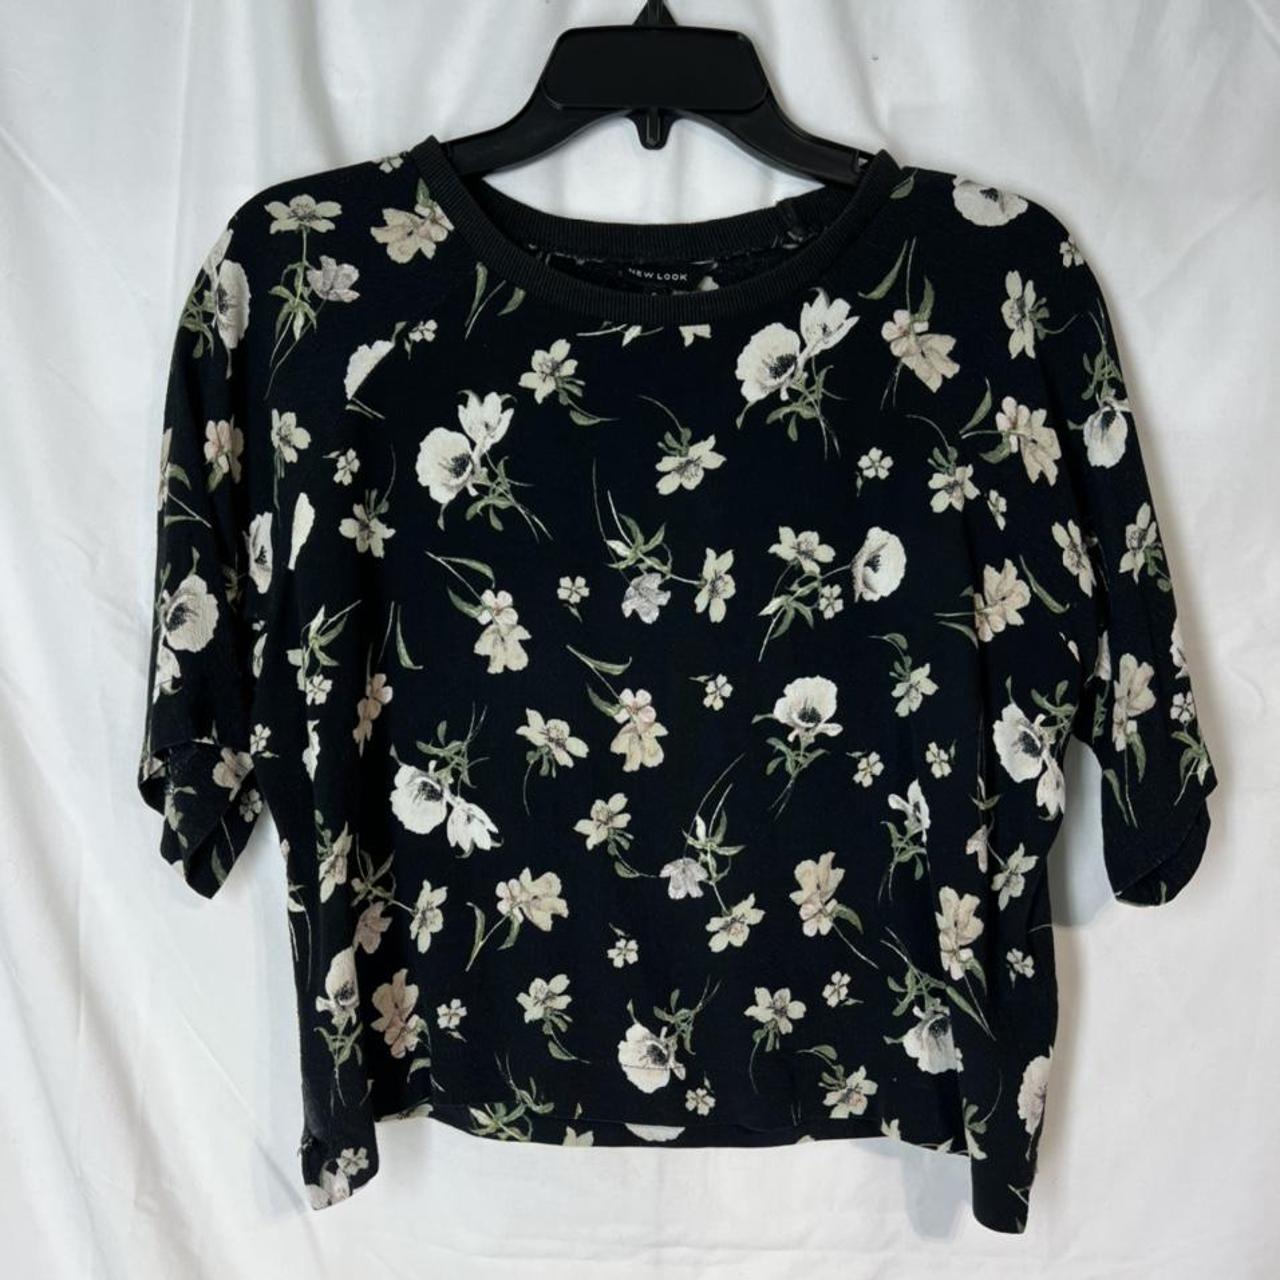 New Look Women's White and Black Crop-top